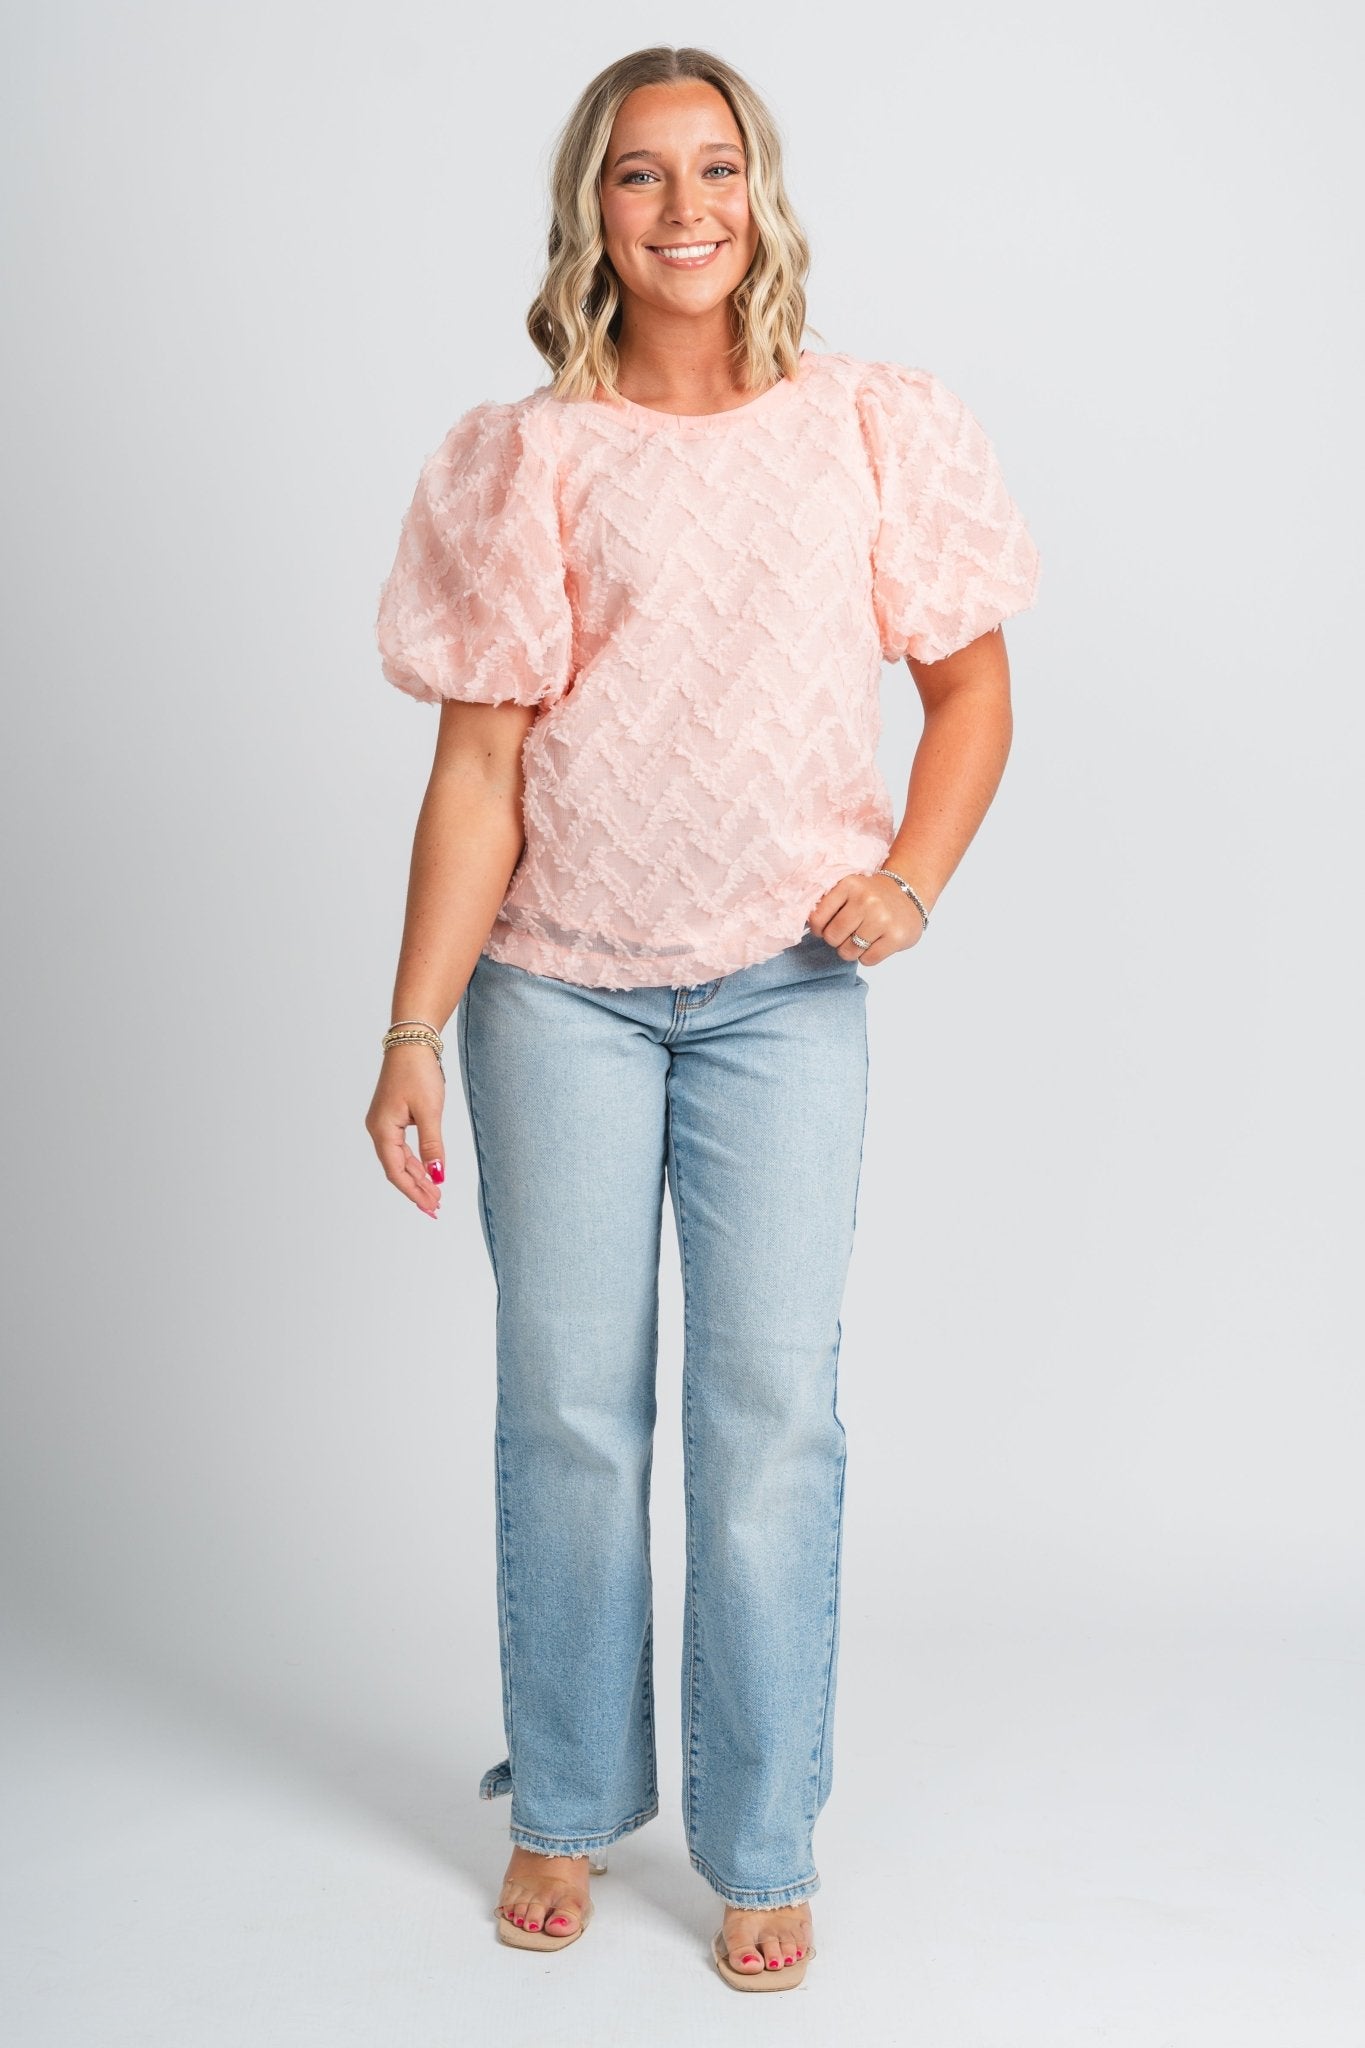 Cello high rise dad jeans light denim - Stylish jeans - Cute Easter Clothing Line at Lush Fashion Lounge Boutique in Oklahoma